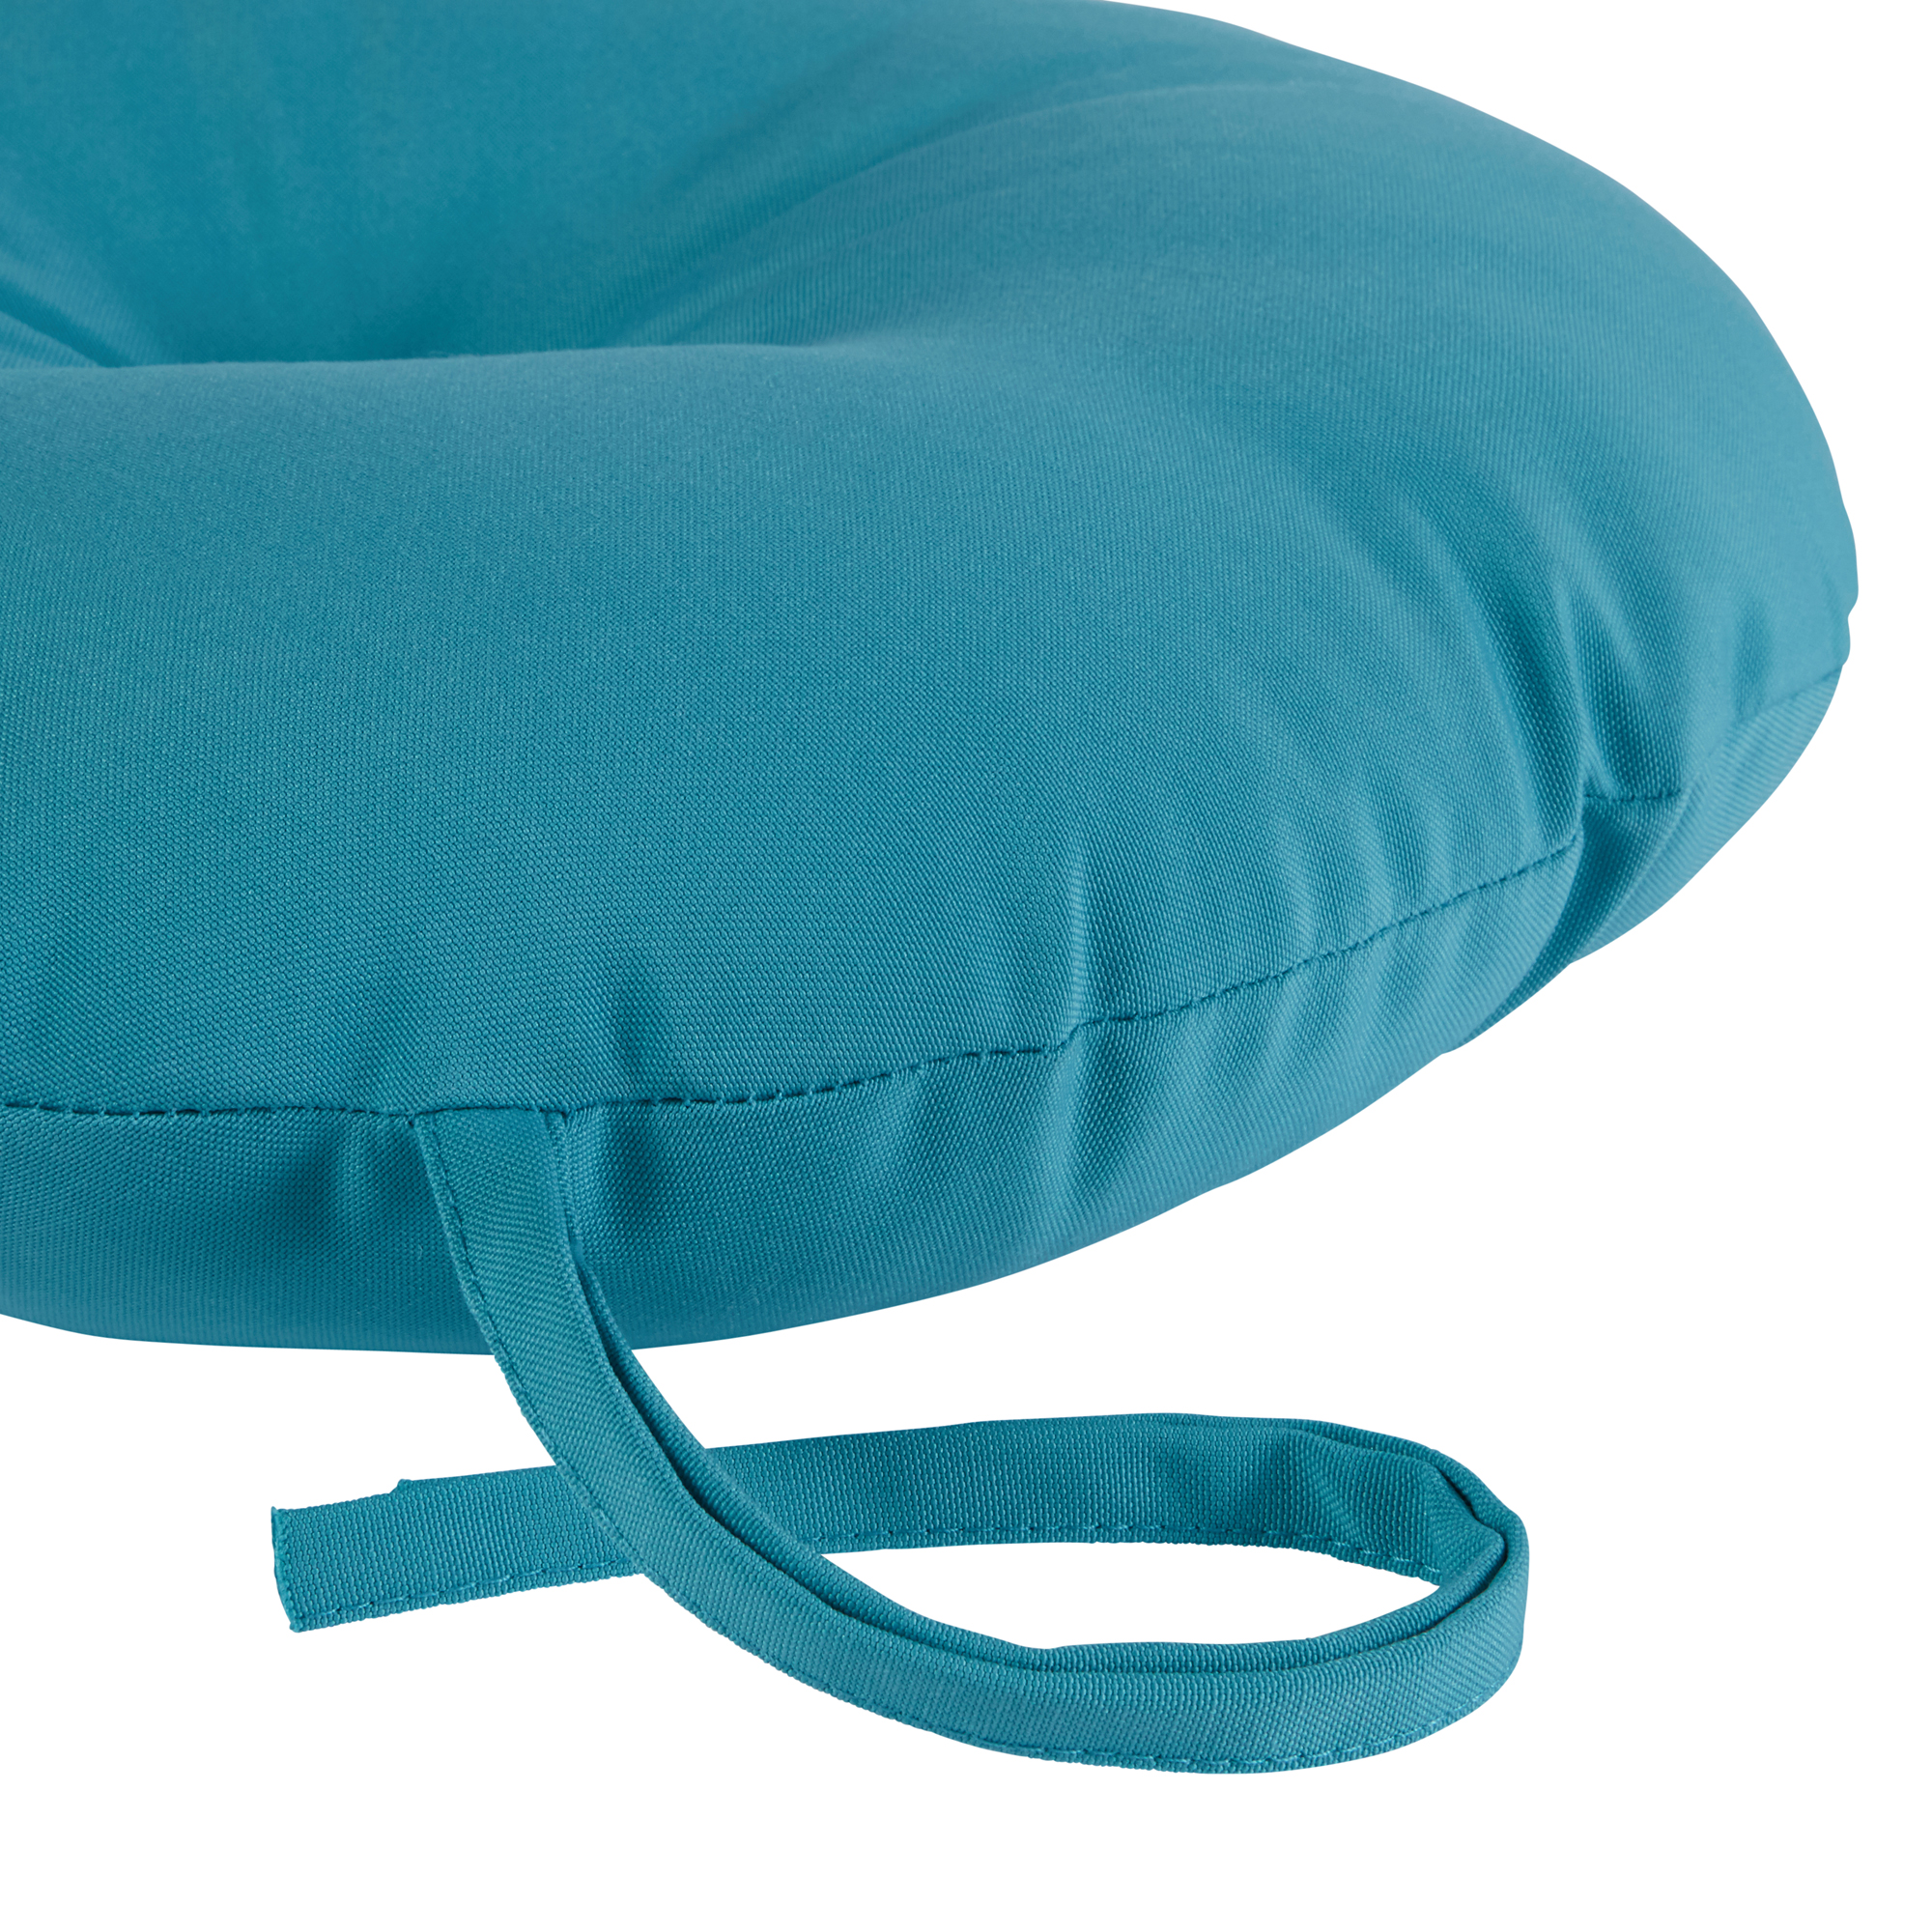 Greendale Home Fashions Teal 15 in. Round Outdoor Reversible Bistro Seat Cushion (Set of 2) - image 3 of 6